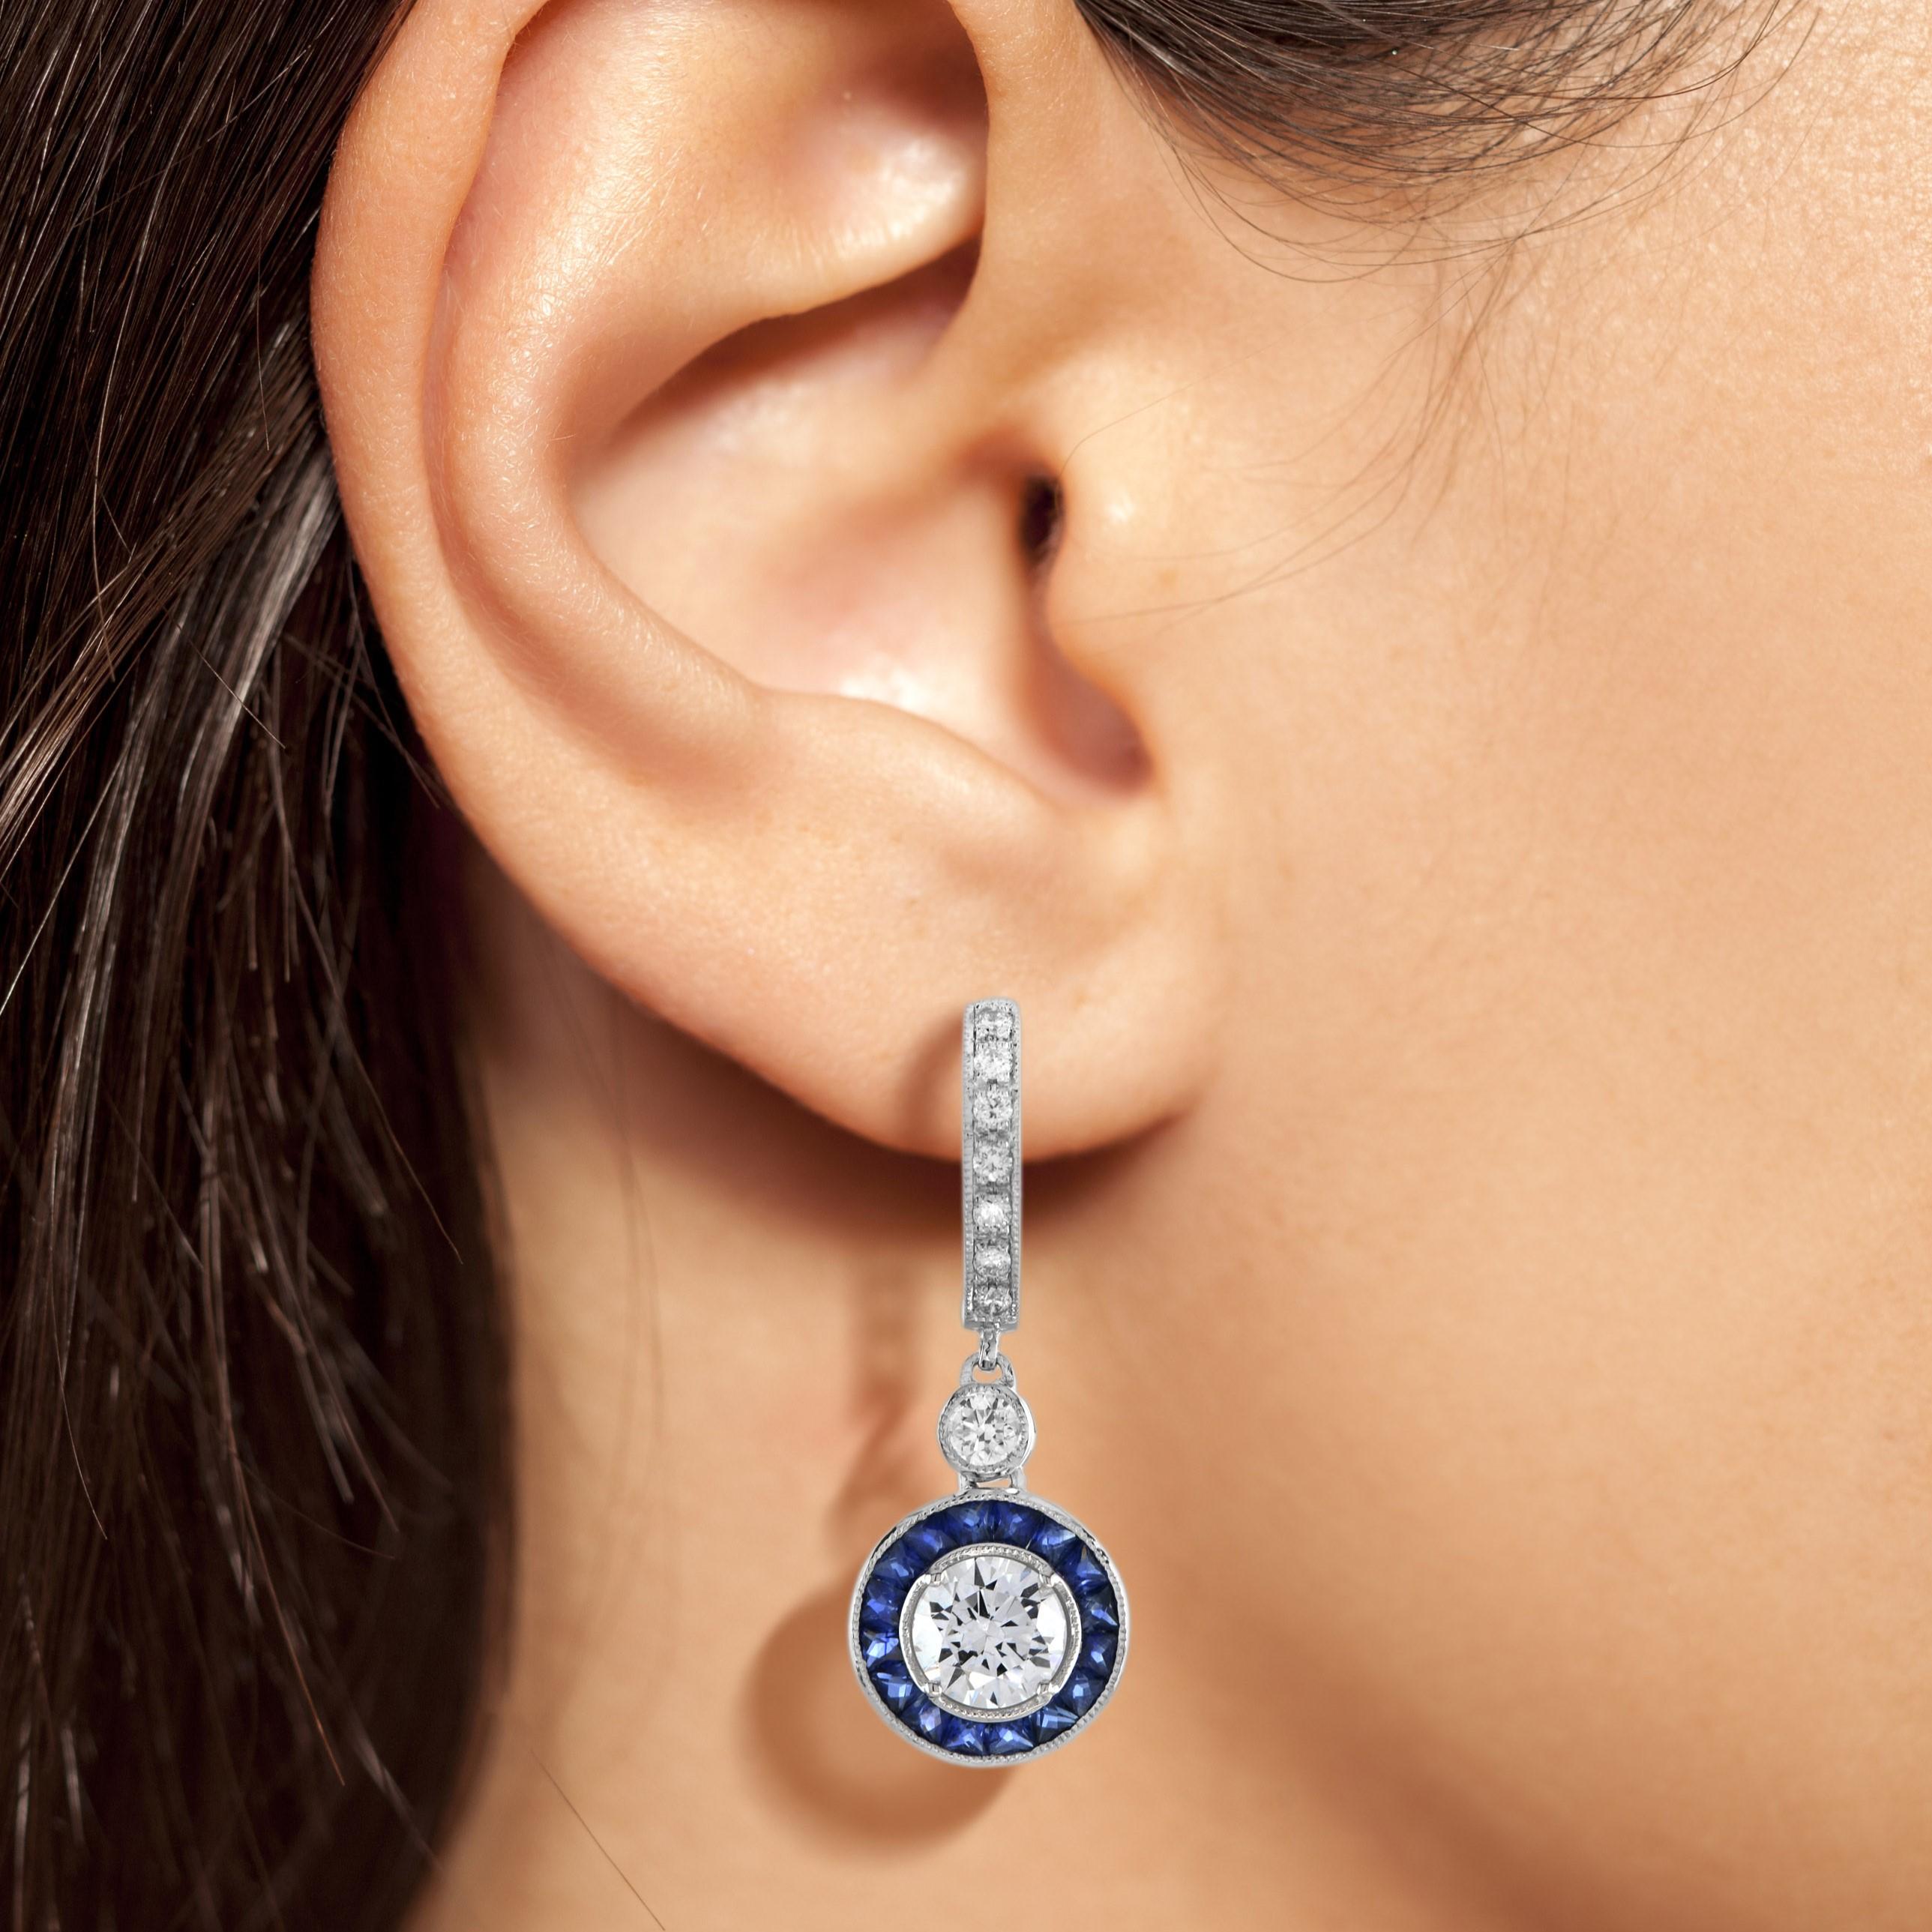 Exquisite early Art Deco inspired Diamond and Blue Sapphire earrings. The central Diamond is surrounded by finely set double halo sapphires to an outer creating a chic octagonal form. The earrings are perfectly worn with the same design halo